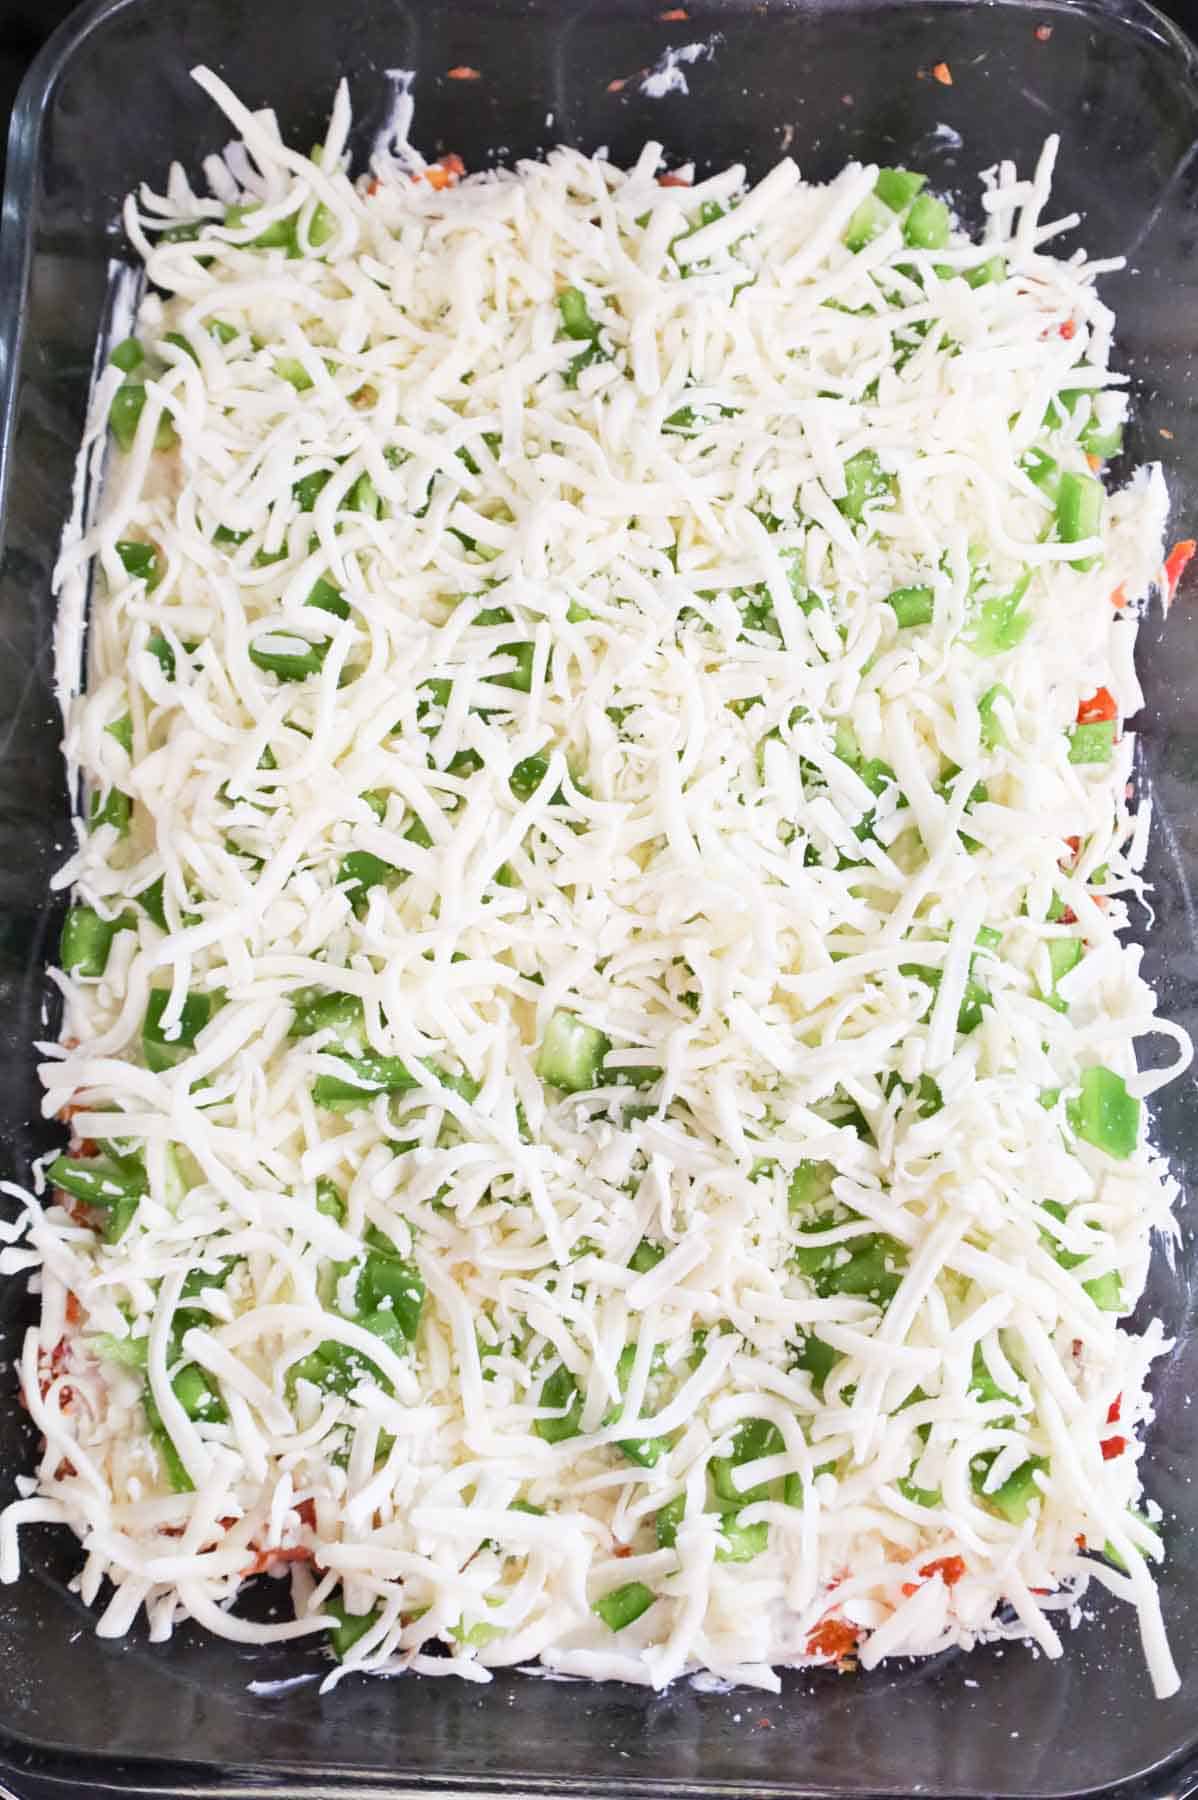 shredded mozzarella and green peppers on top of meatloaf mixture in a baking dish